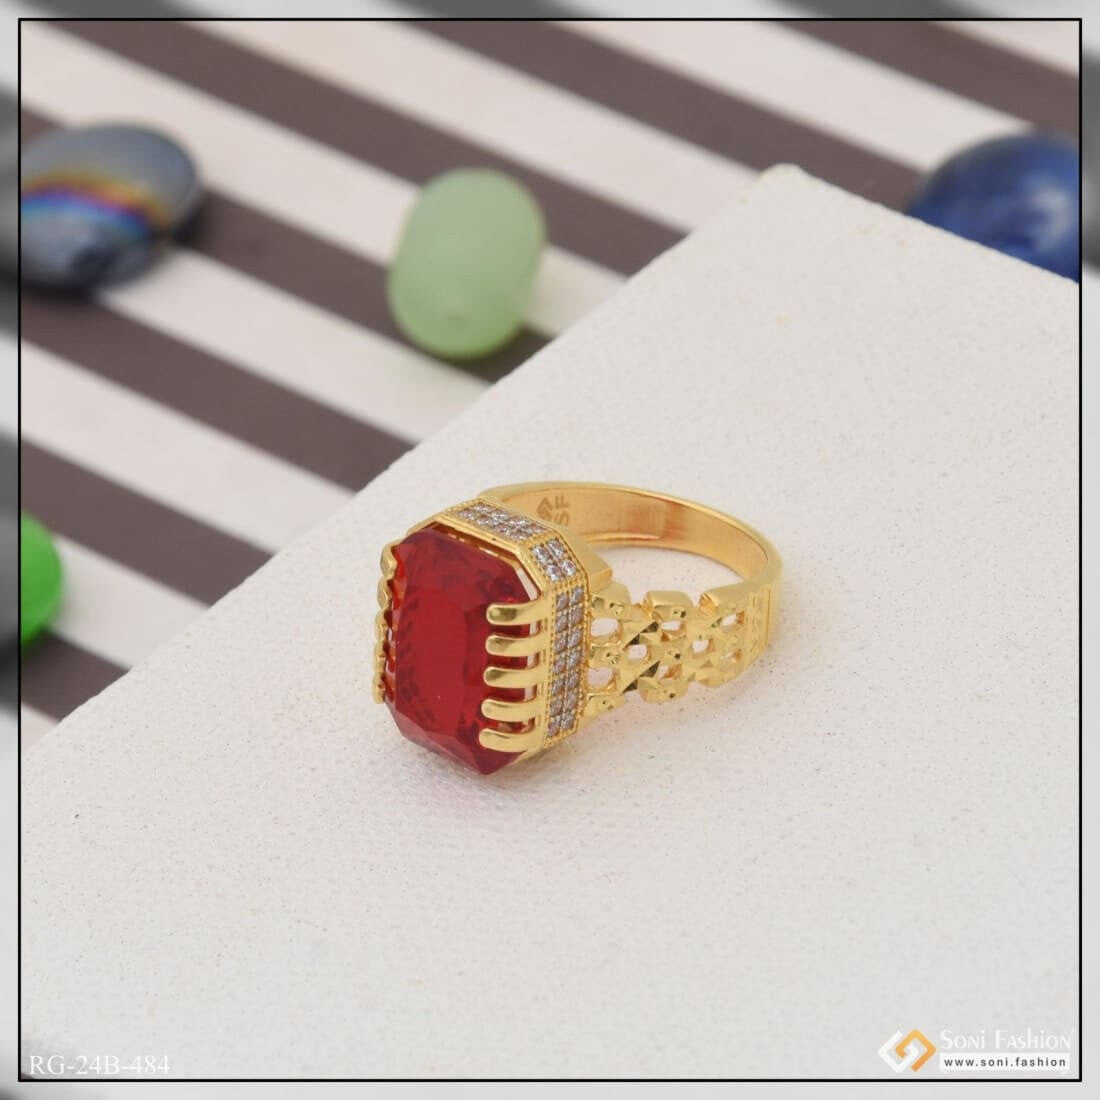 1 Gram Gold Plated Red Stone With Diamond Popular Design Ring For Men -  Style B484 – Soni Fashion®